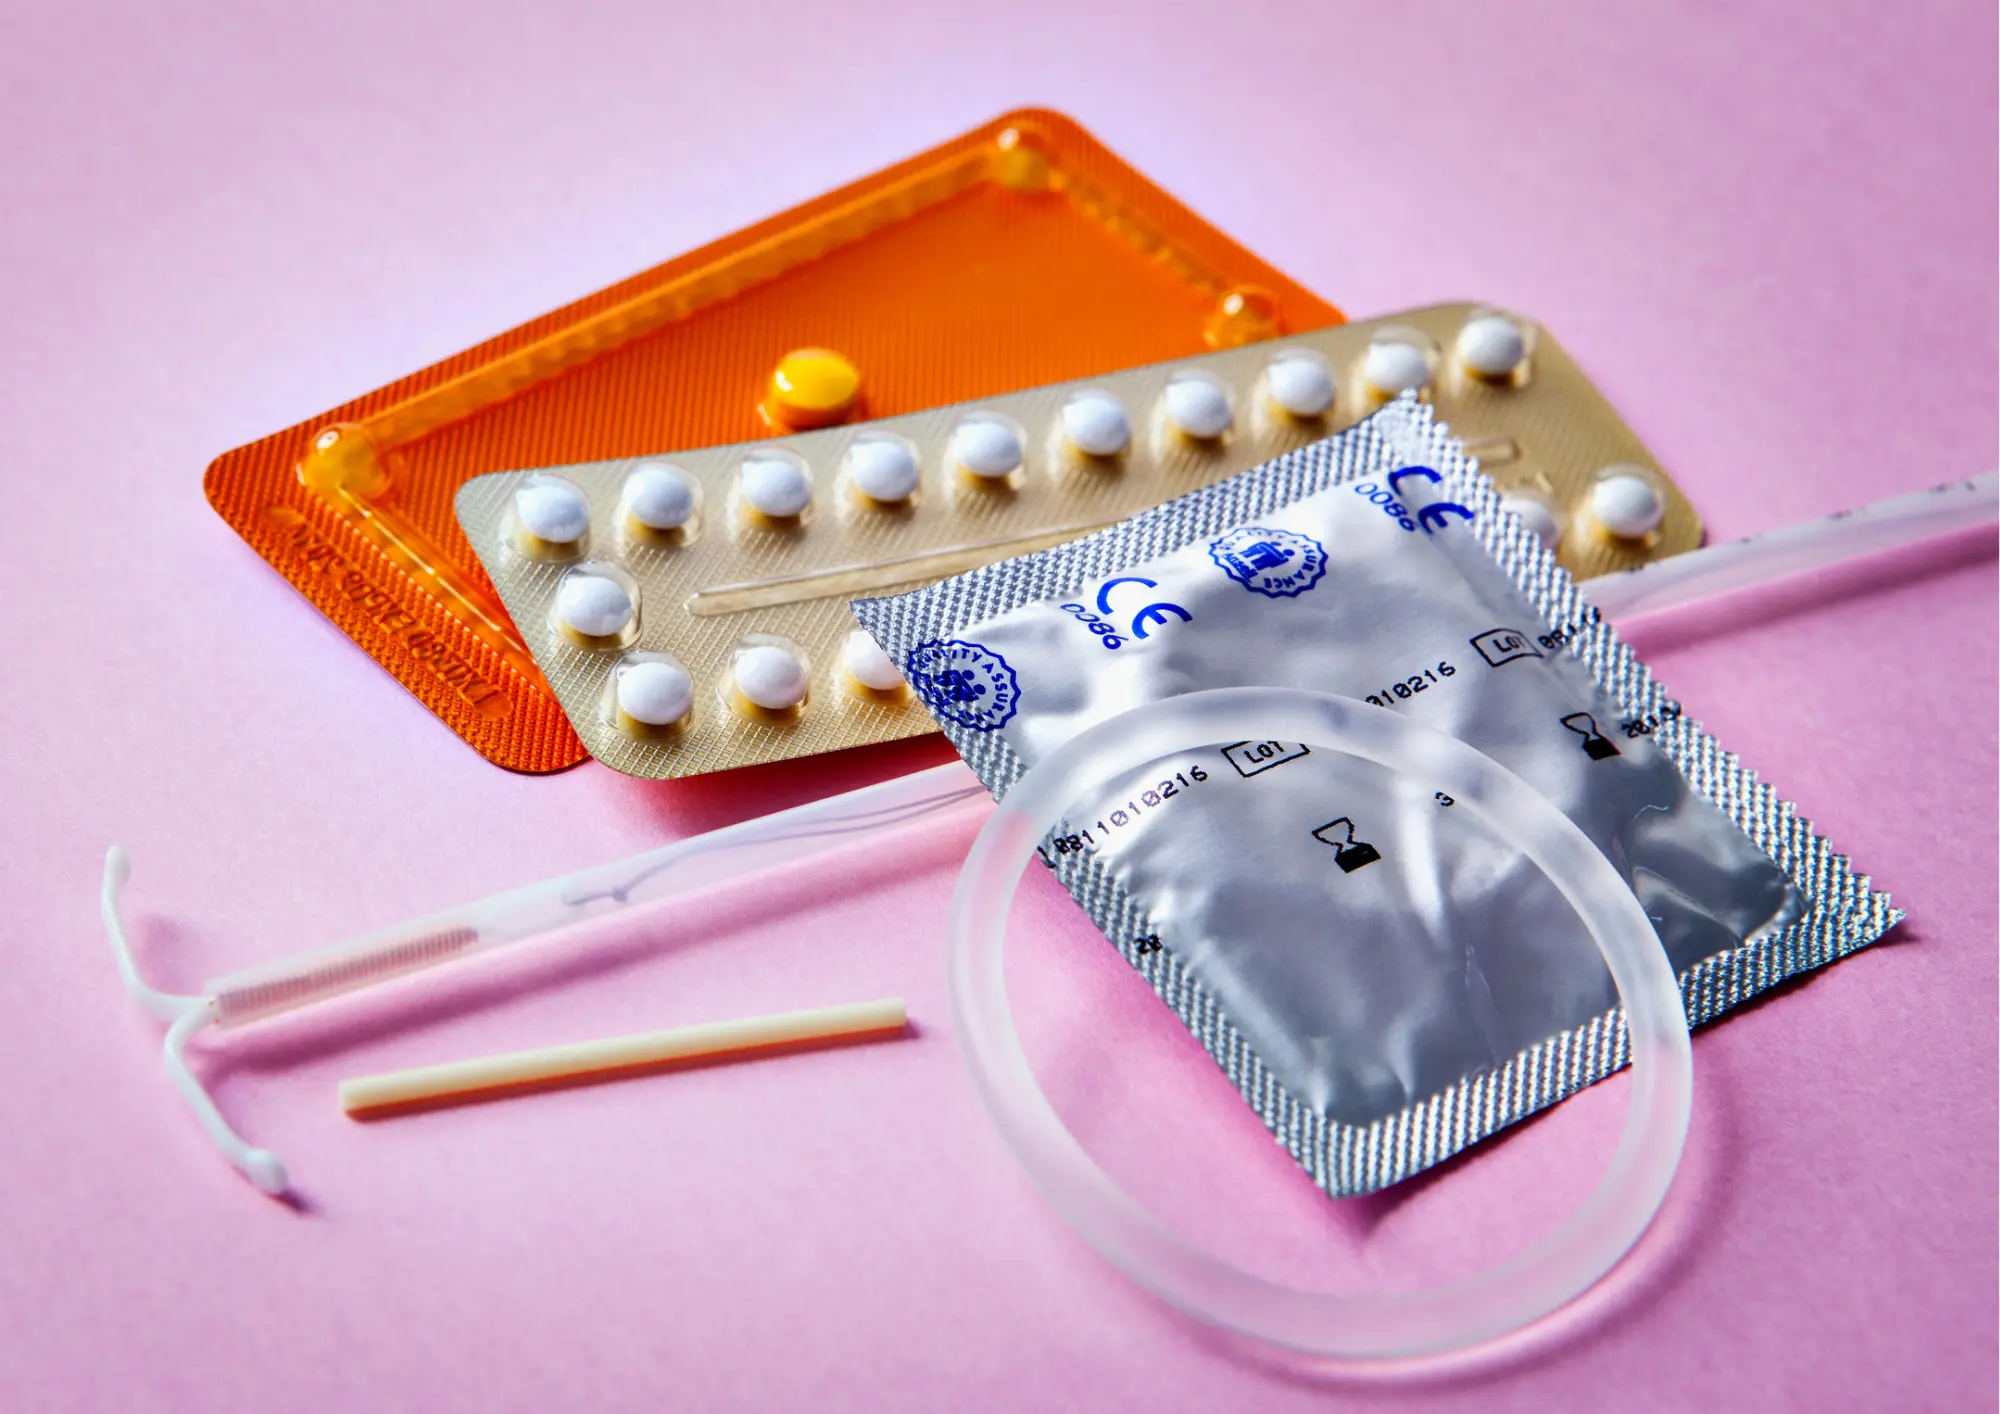 Hormonal Birth Control Methods for Women: A Guide for Spanish-Learning Medical Professionals